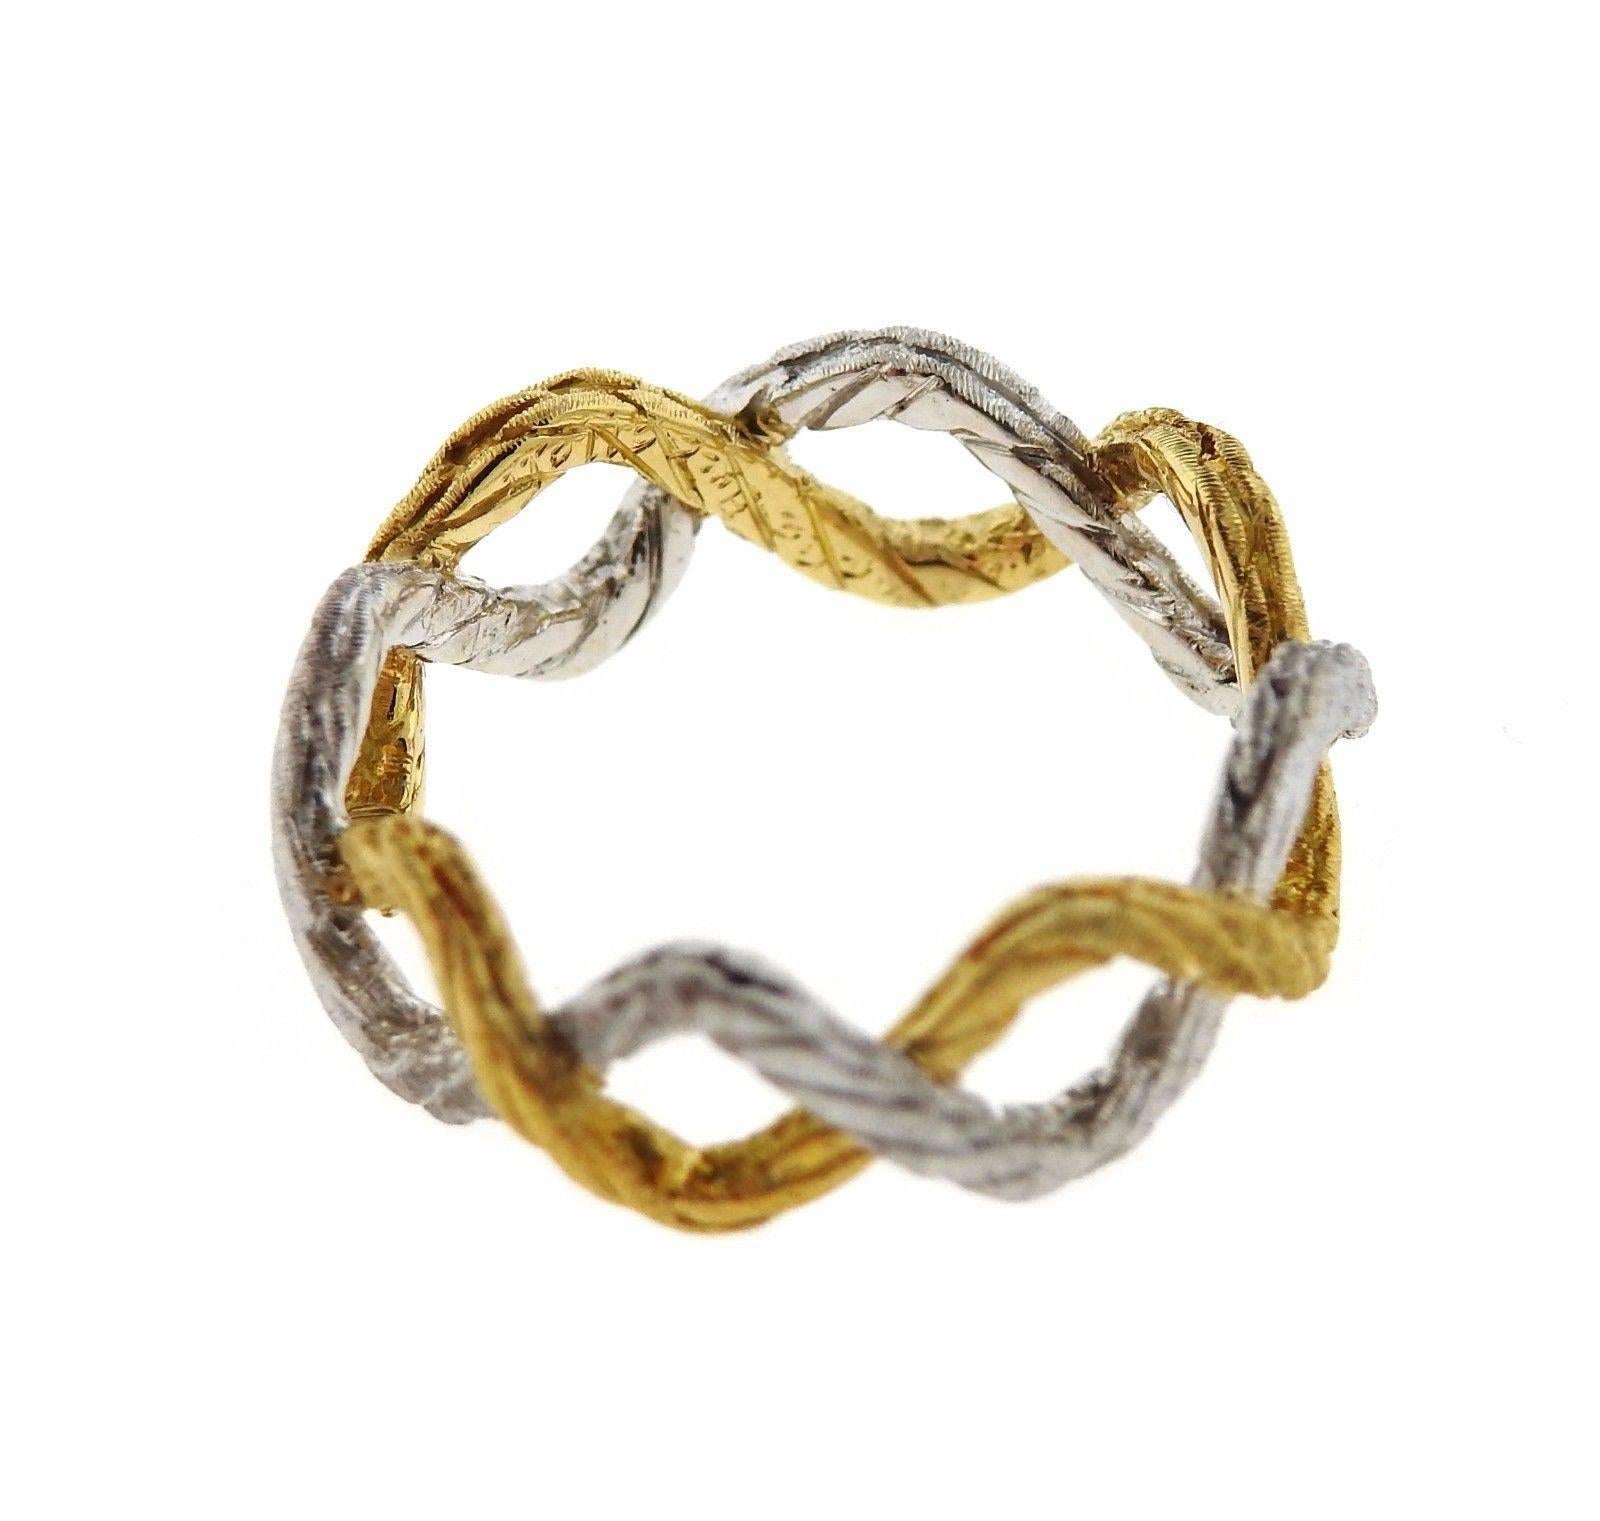 An 18k yellow and white gold braided band ring.  The ring is a size 5 1/2, ring is 7.5mm wide.  The weight of the piece is 3.8 grams.  Marked: Buccellati Italy 18k.  Retail is $1880. Comes with Buccellati paperwork.